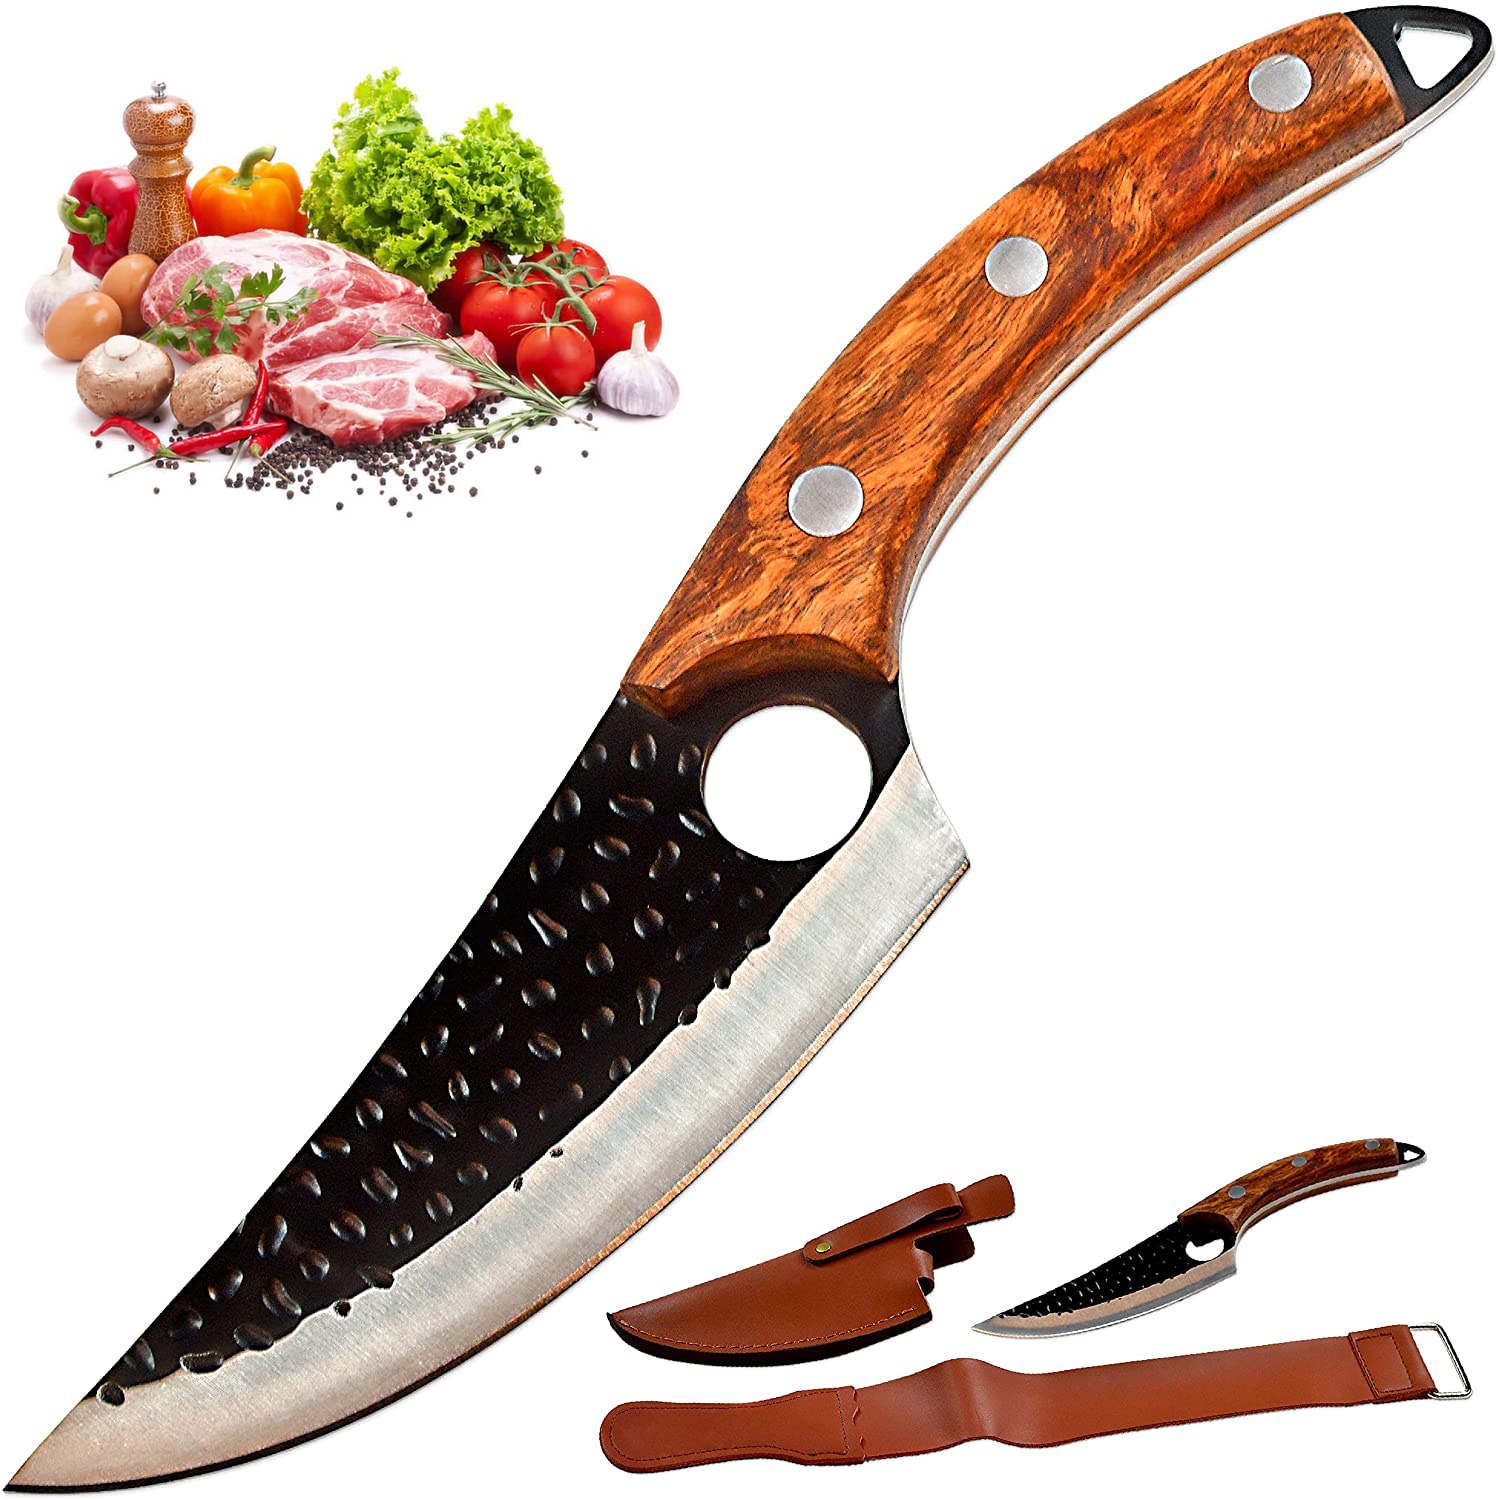 Serbian Butcher Knife, Meat Cleaver Boning Knife, Forged Serbian Chef Knife with Sheath and Belt Leather Strop for Vegetable